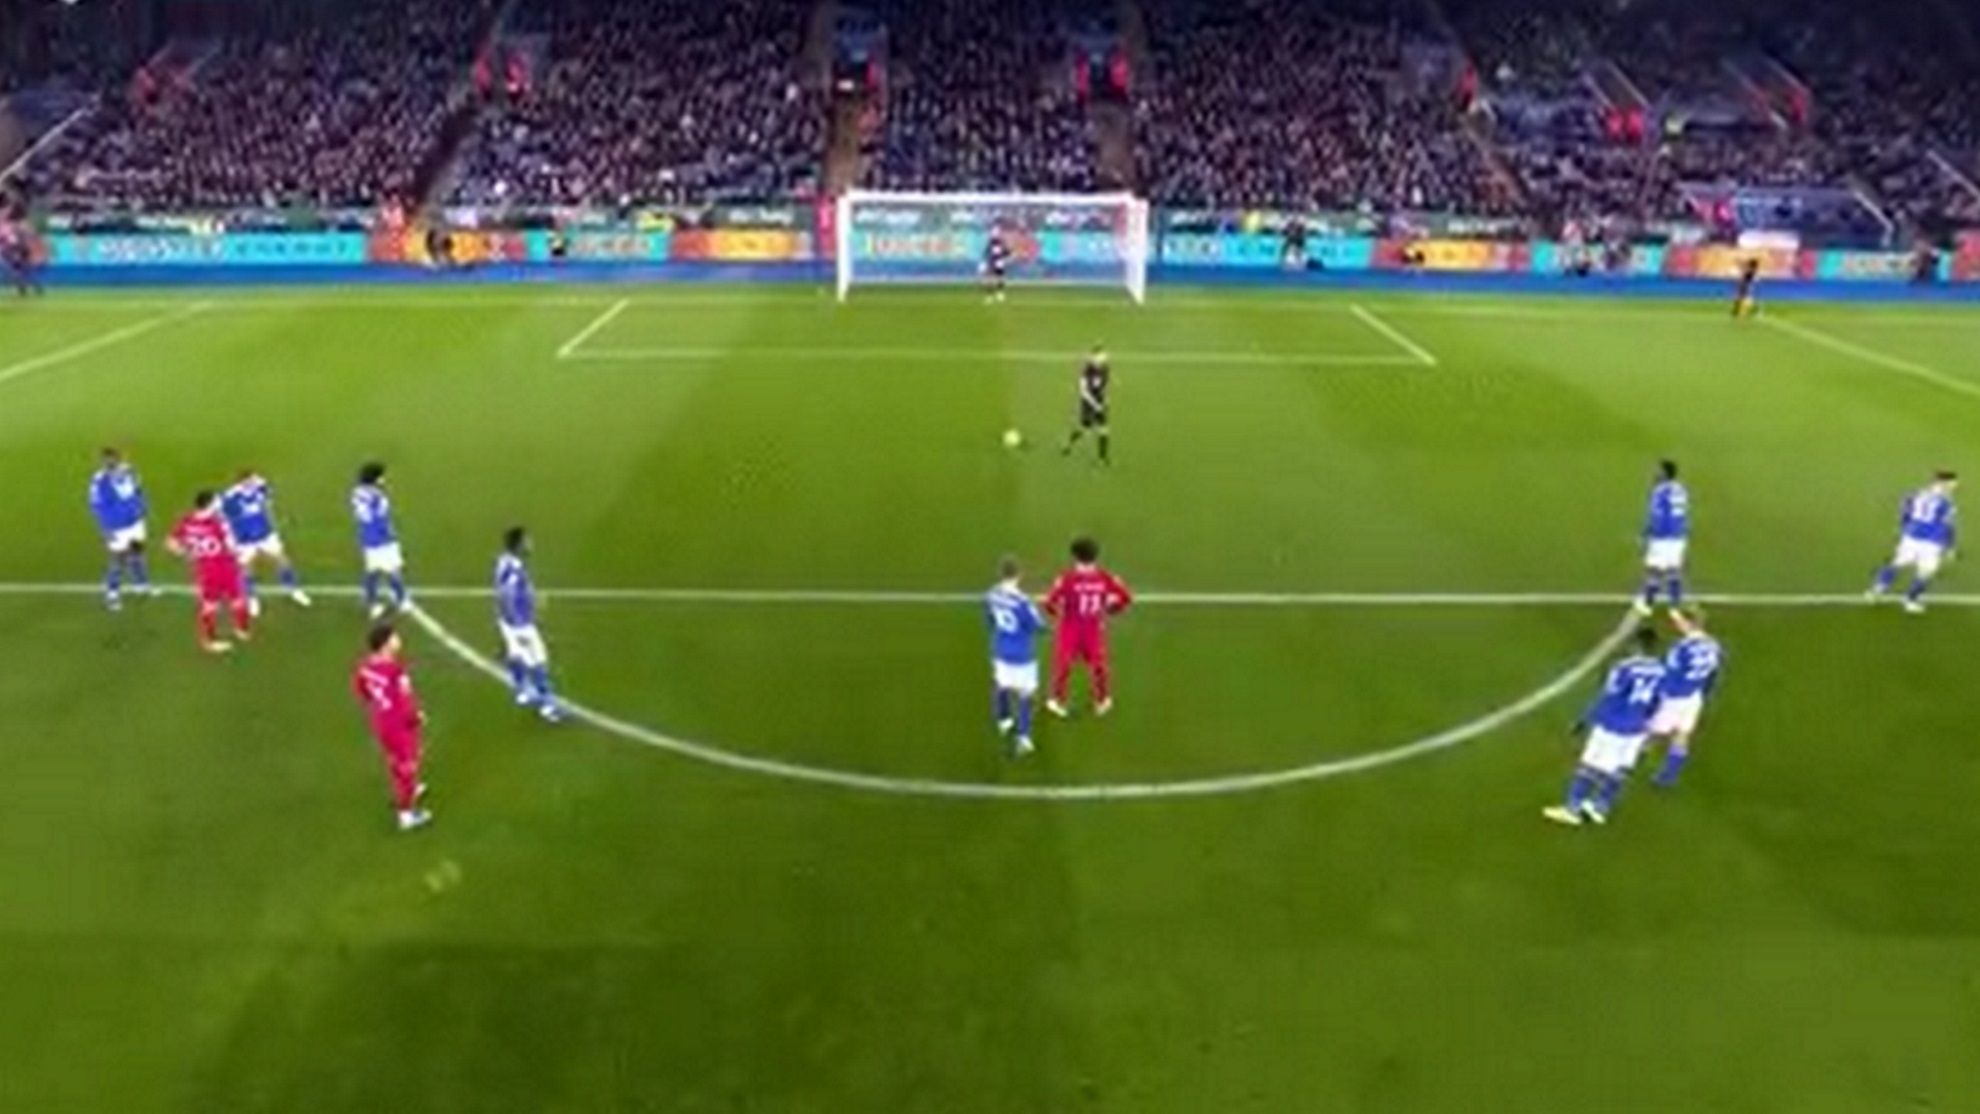 Watch how Maddison distracted Salah to provoke the penalty miss